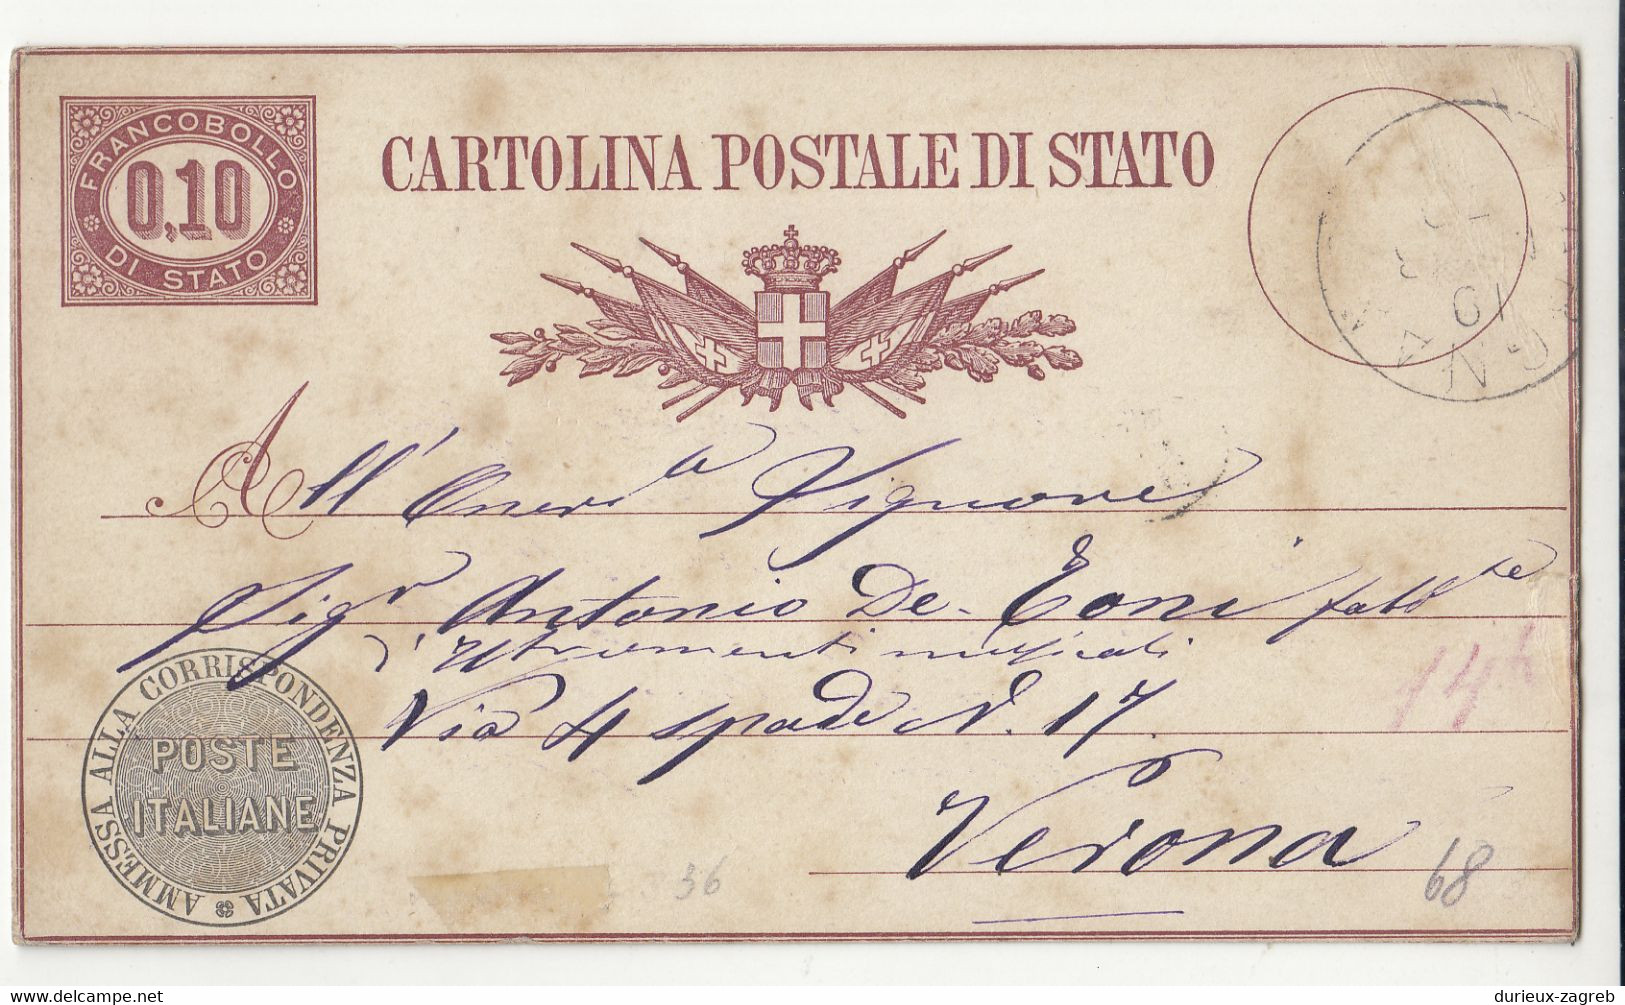 Italy Official Postal Stationery Postcard Cartolina Postale Di Stato Posted 18?? B230120 - Entiers Postaux